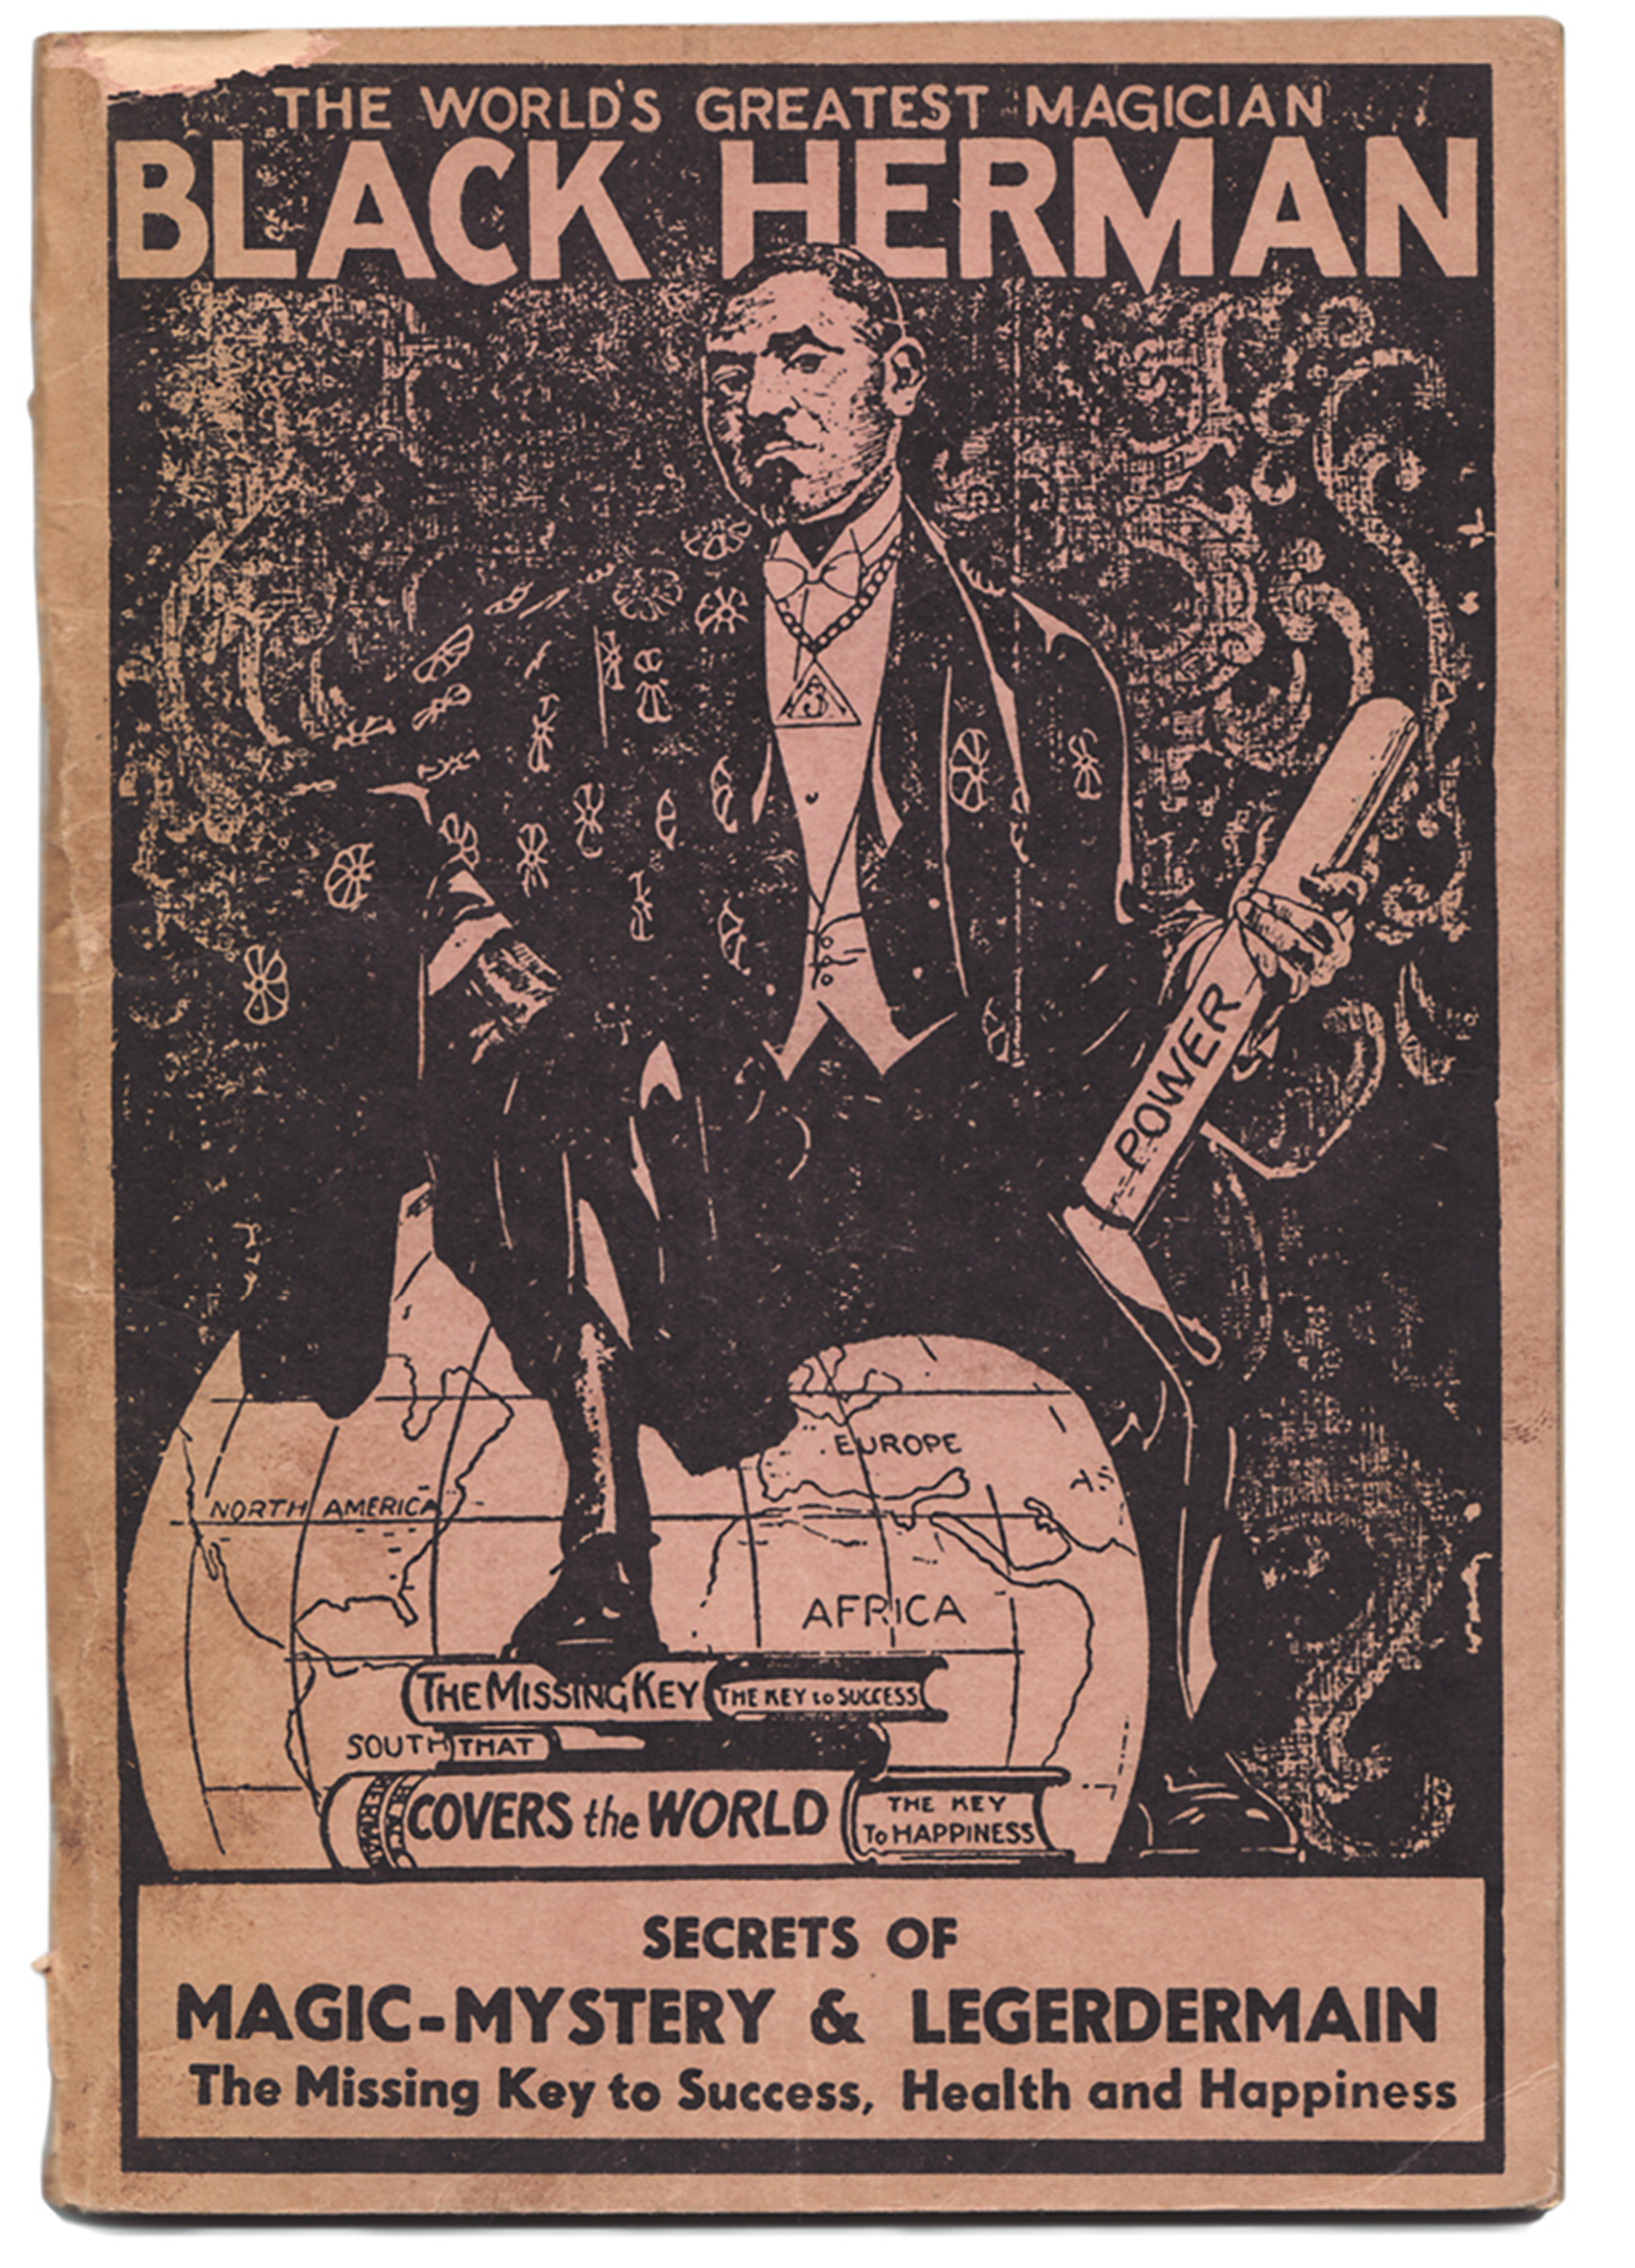 Black Herman’s characteristic self-presentation as a master of spiritual and material mysteries. Cover of Black Herman’s Secrets of Magic-Mystery & Legerdemain, 1938. Courtesy The Magic Circle Library, London.